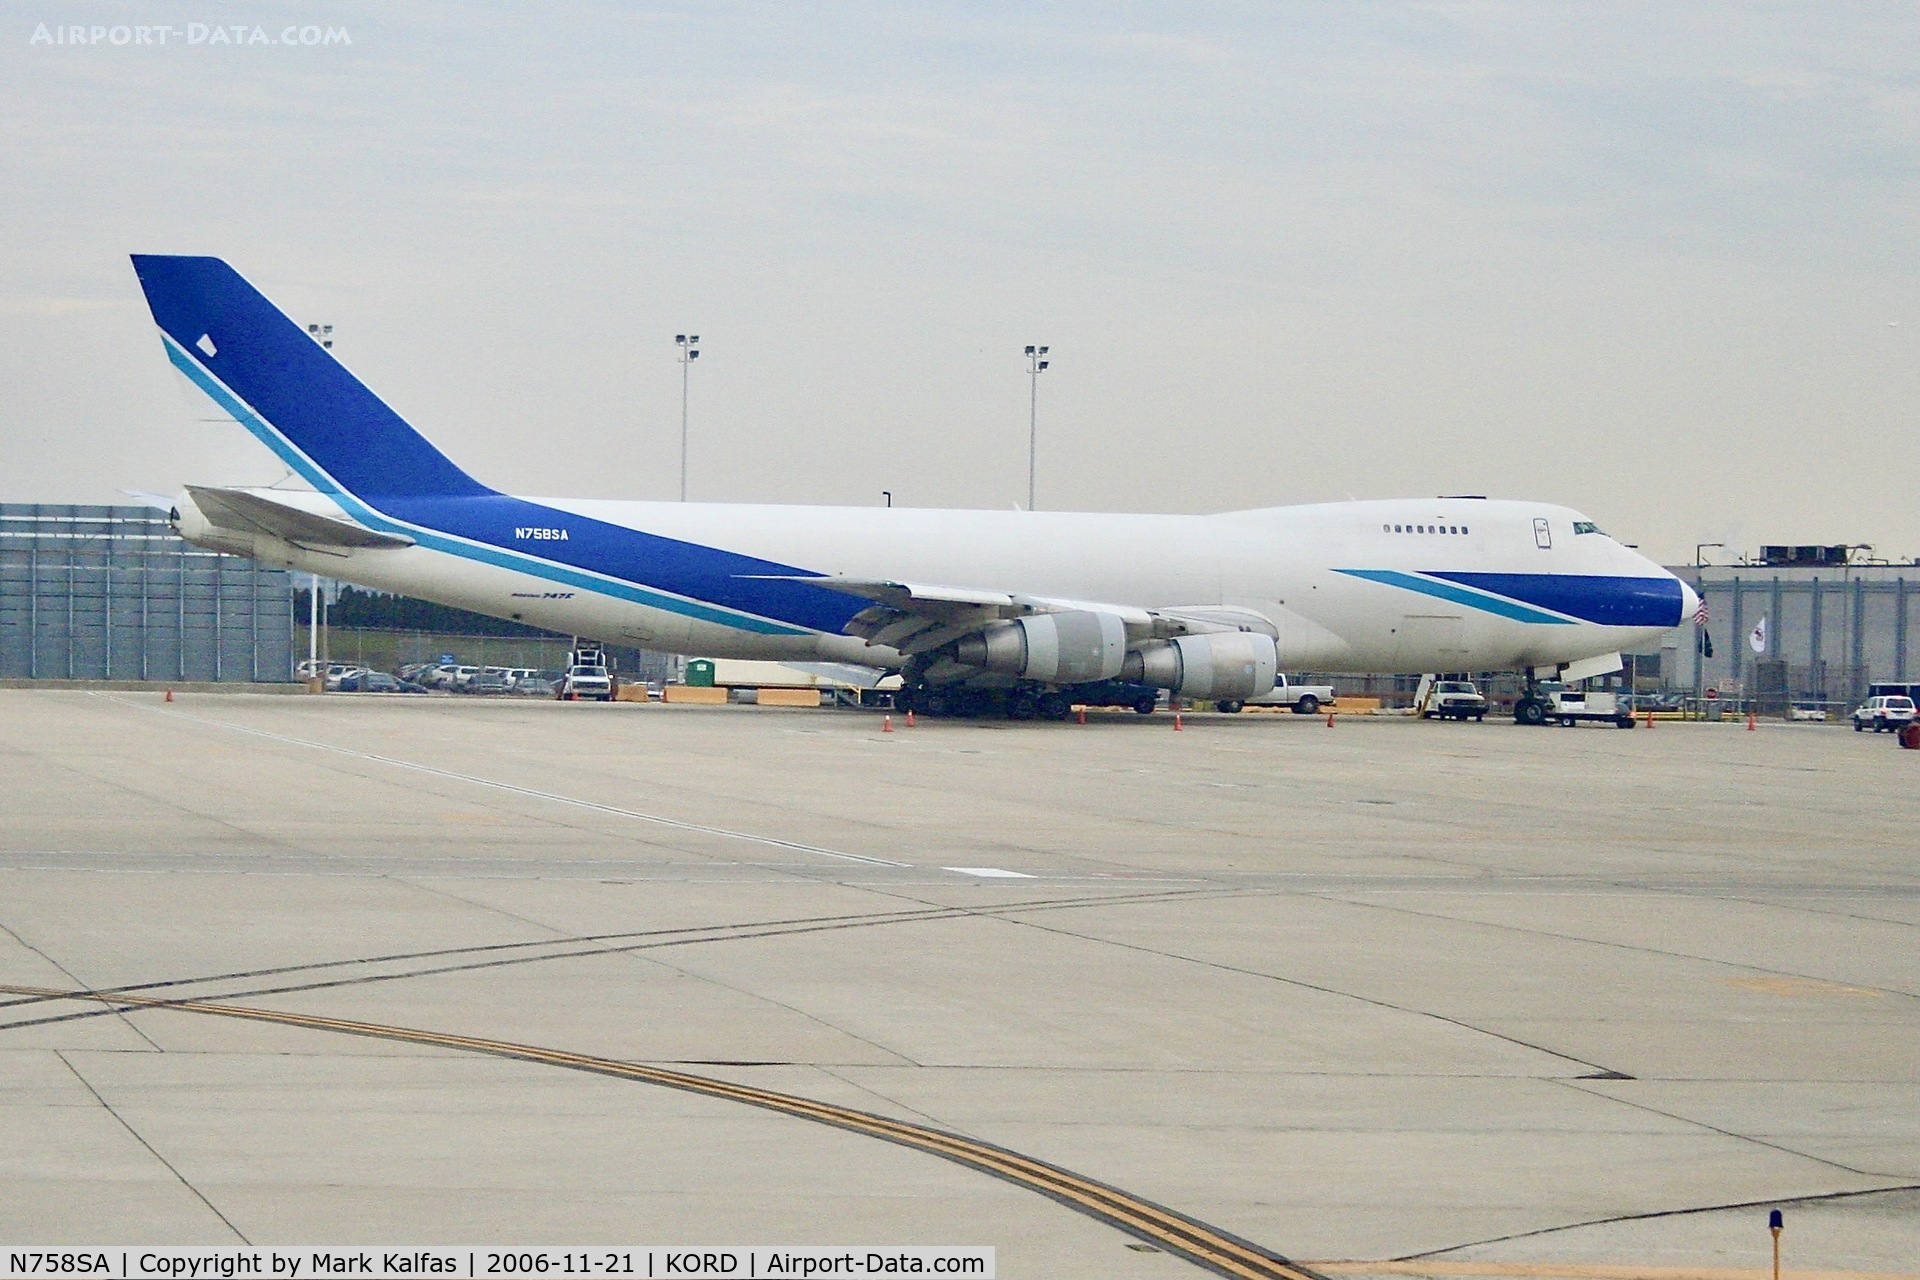 N758SA, 1984 Boeing 747-281F C/N 23138, Southern Air Boeing 747-281F, N758SA,  acquired from NCA Nippon Cargo) on the cargo ramp ORD